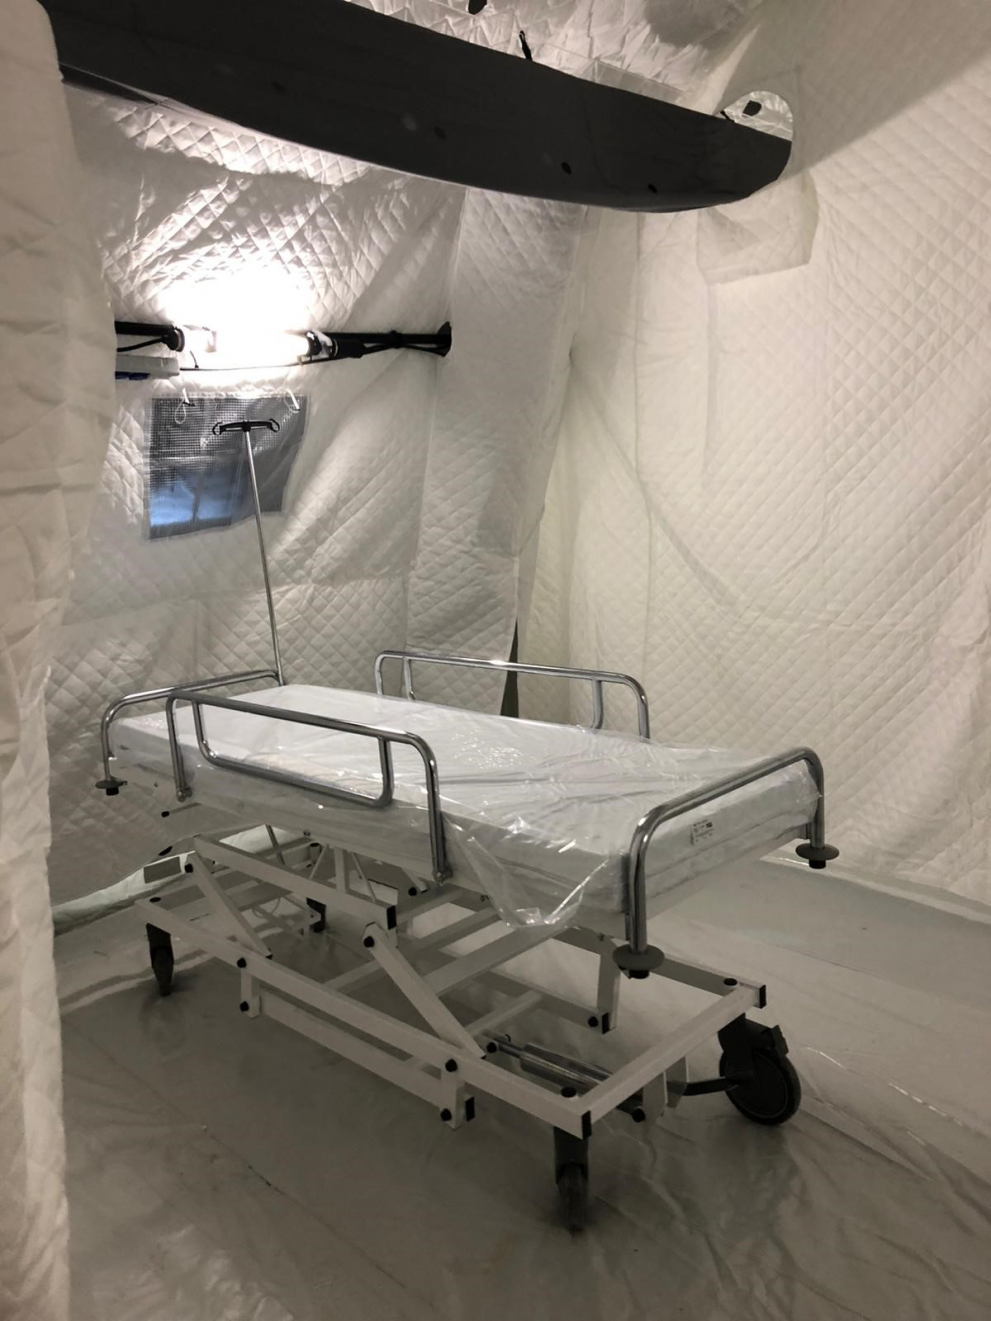 New field hospital donated by the Netherlands (before it was ready for use)